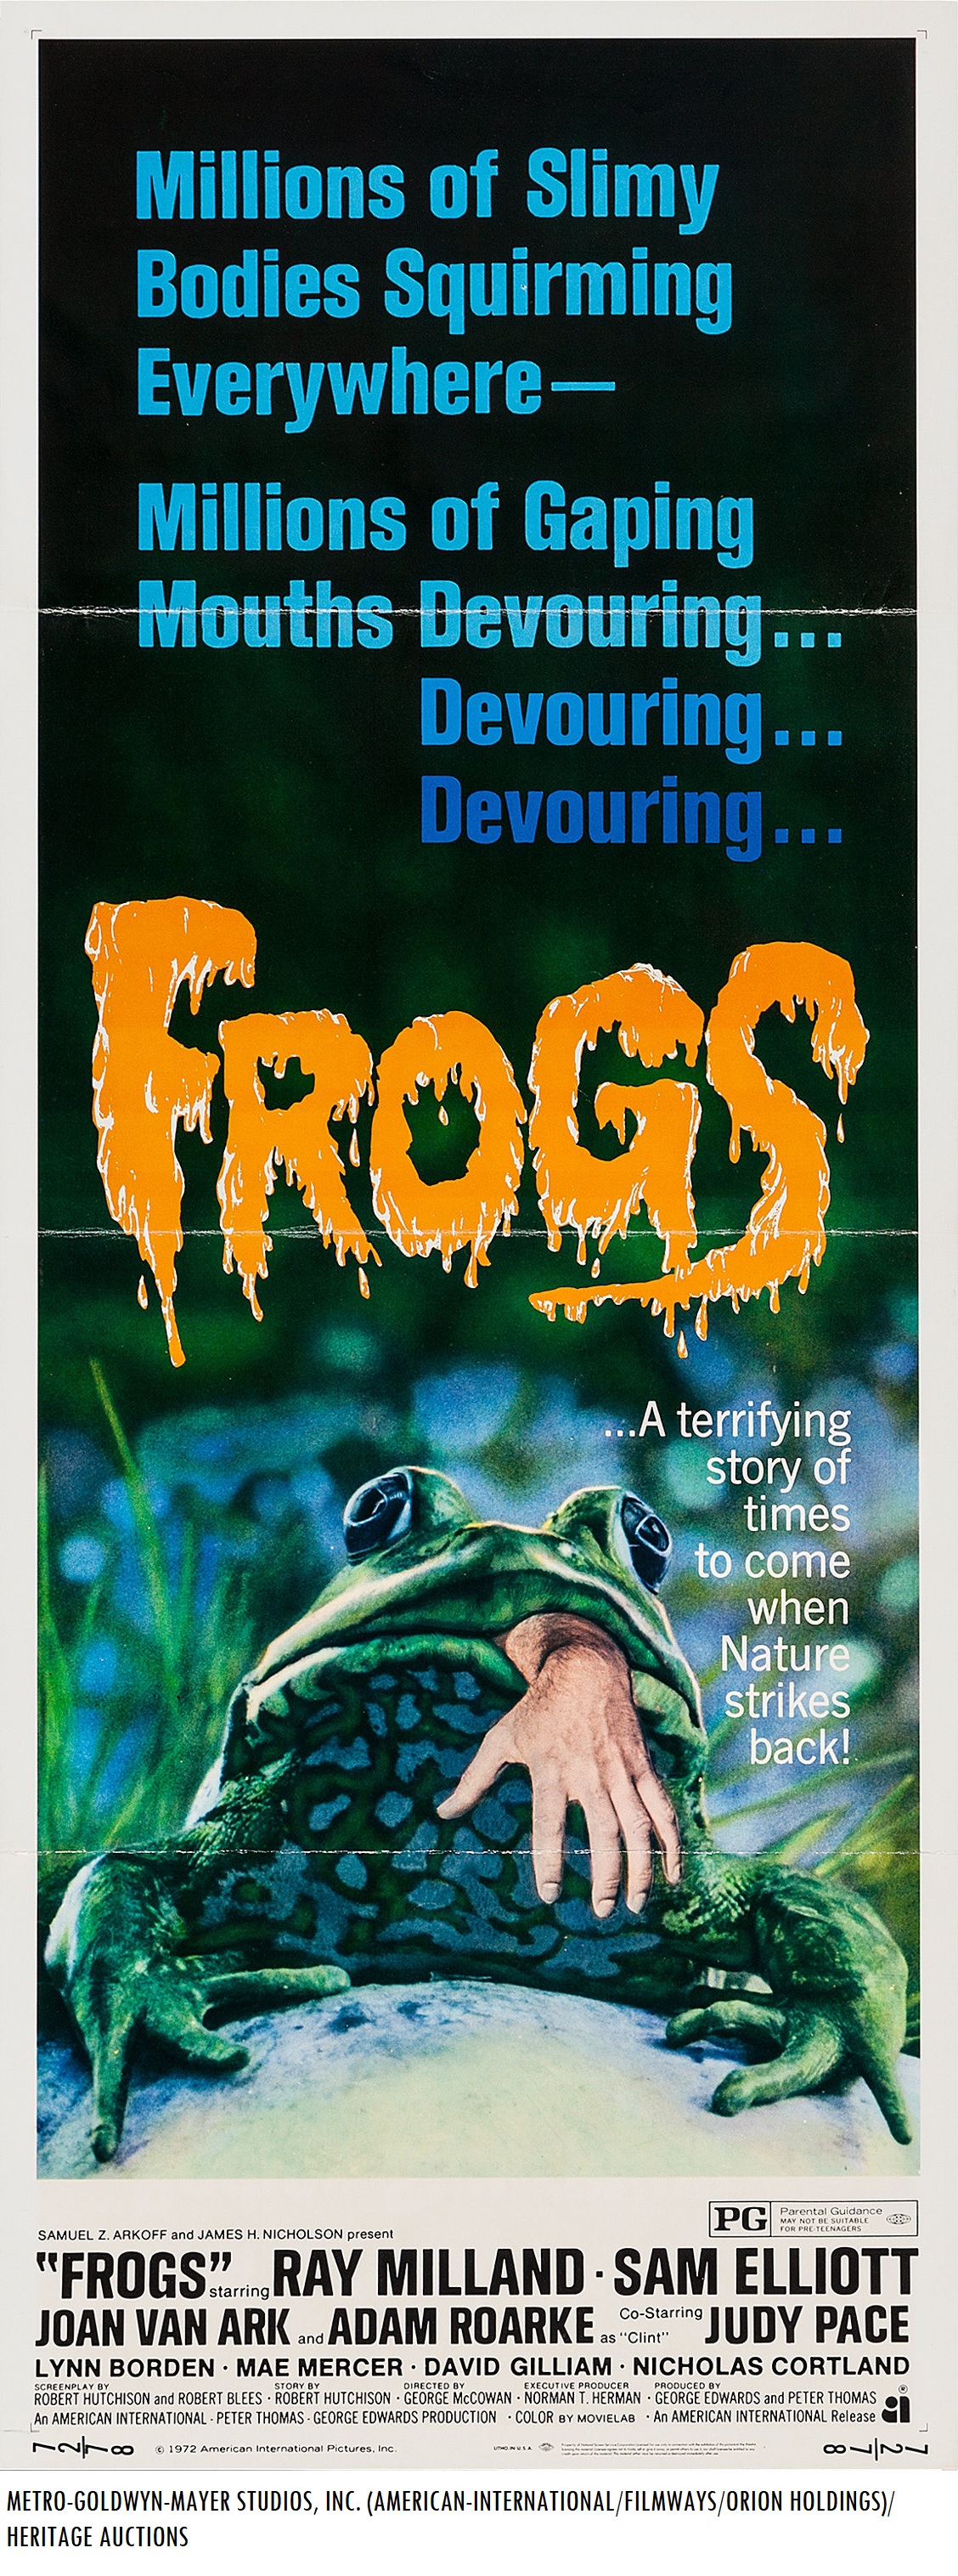 Original_1972_American_International_Theatrical_Poster_Art_Frogs_MGM